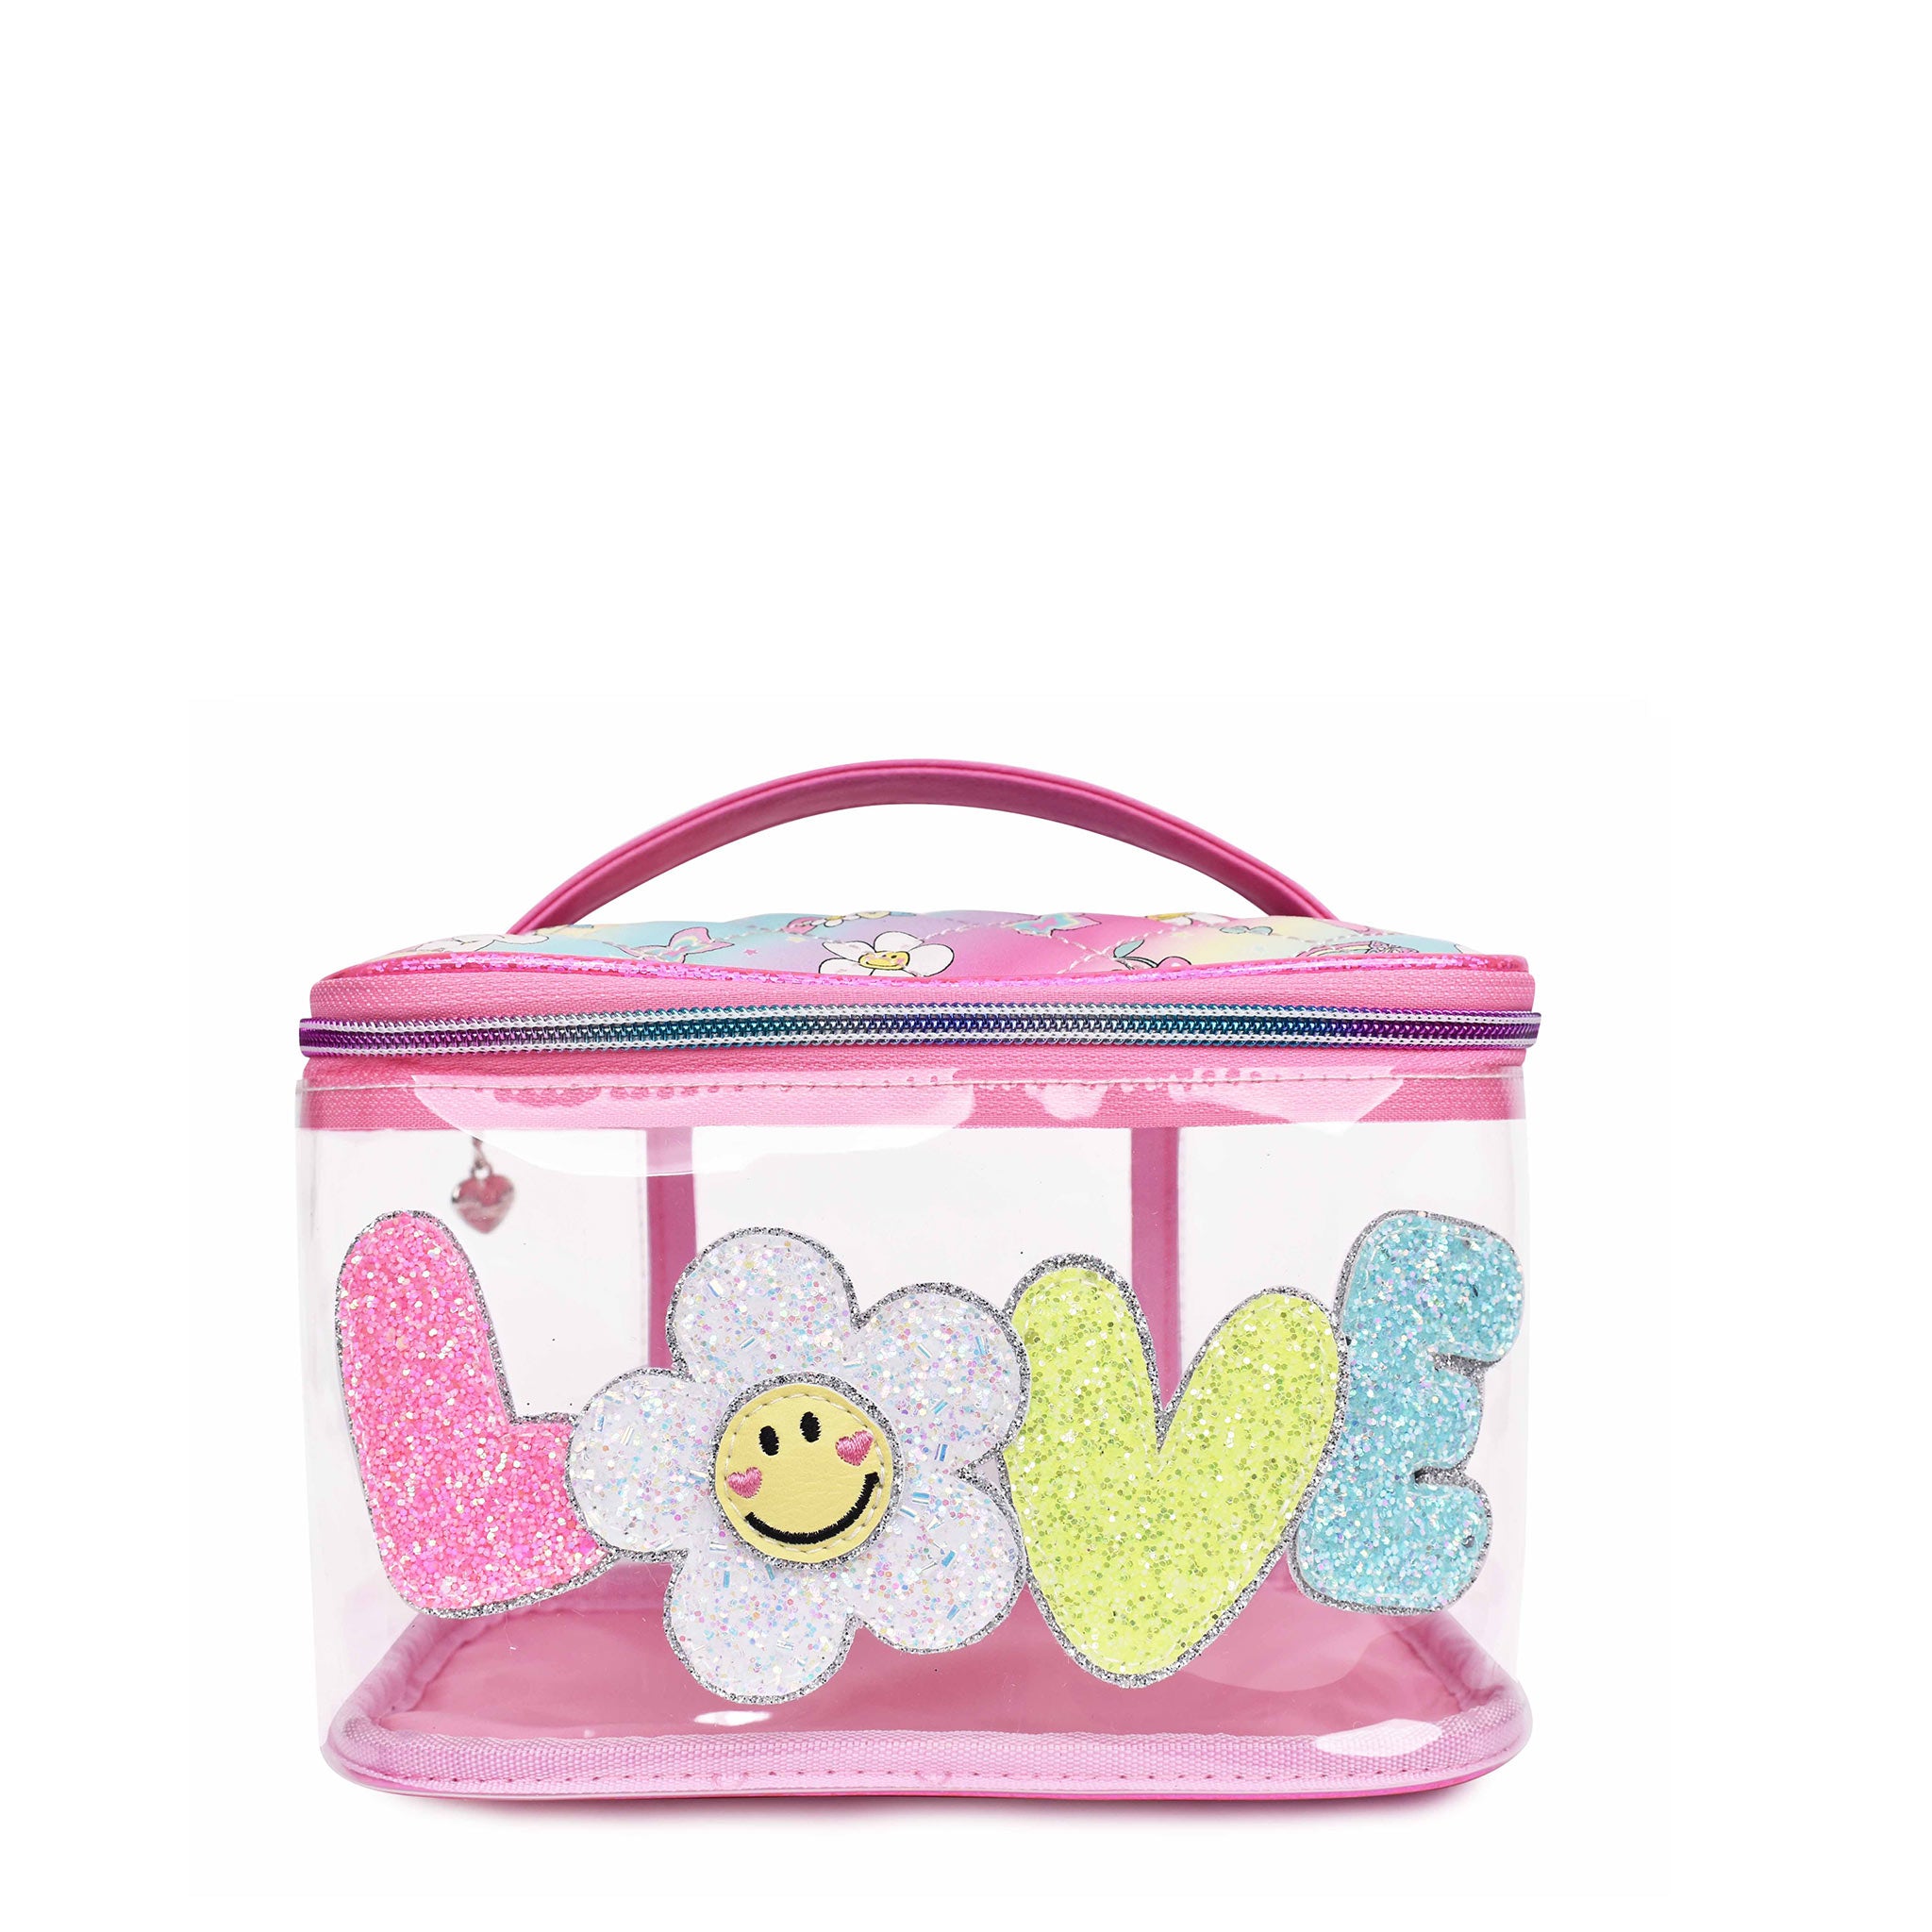 Front view of clear 'Love' daisy glam bag with glitter bubble-letter patches